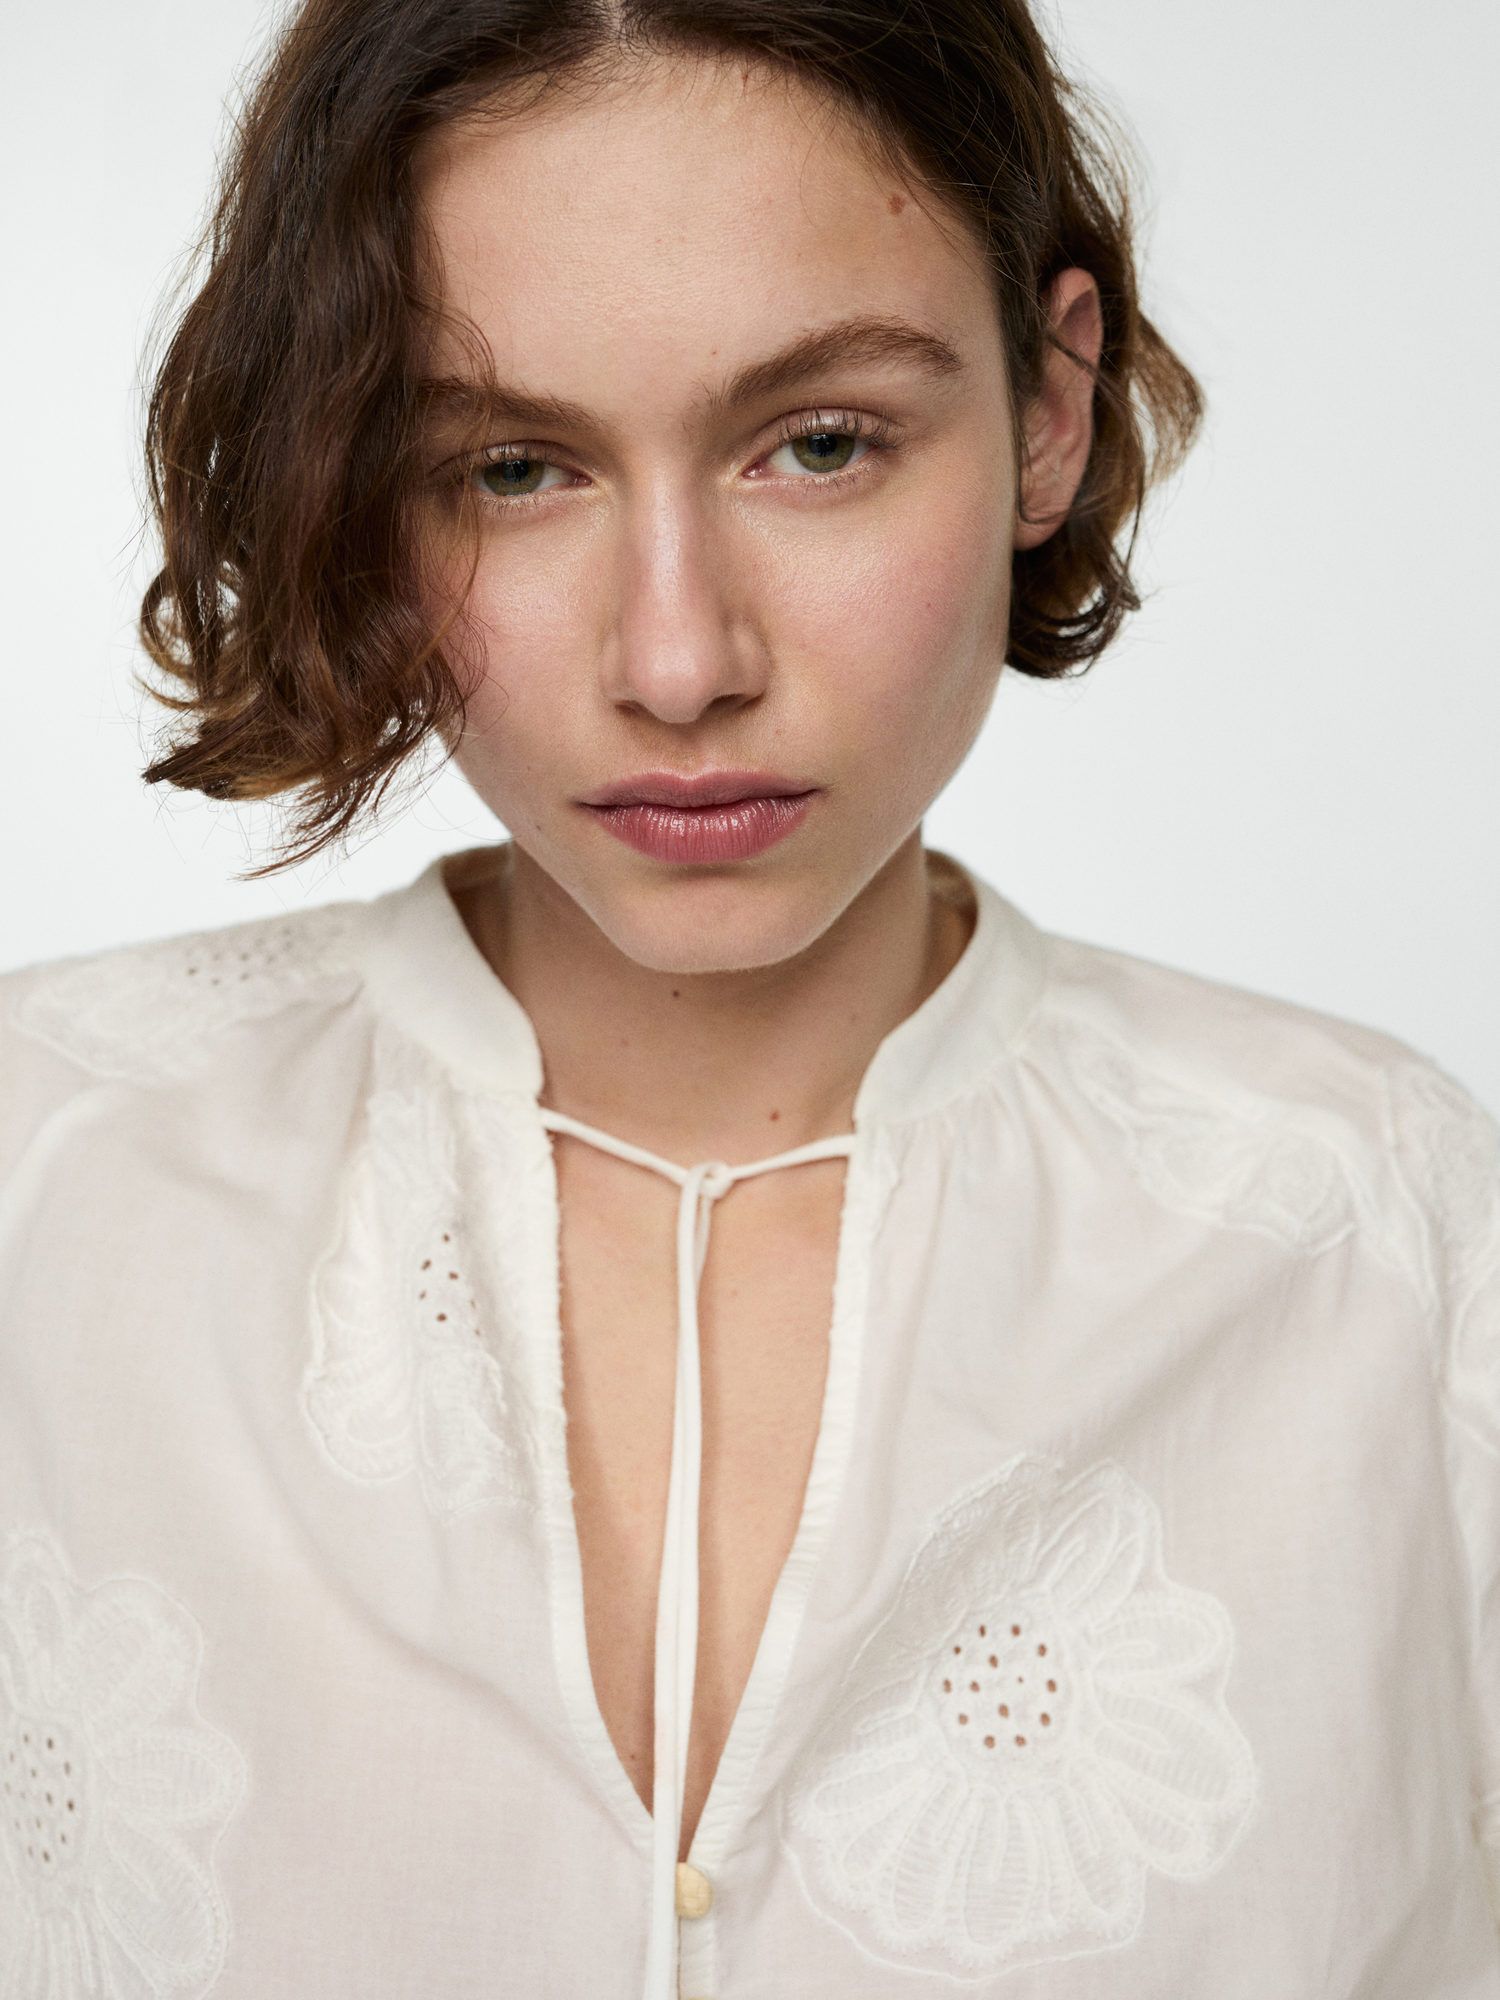 Buy Mango Woody Cotton Floral Embroided Blouse, Natural White Online at johnlewis.com